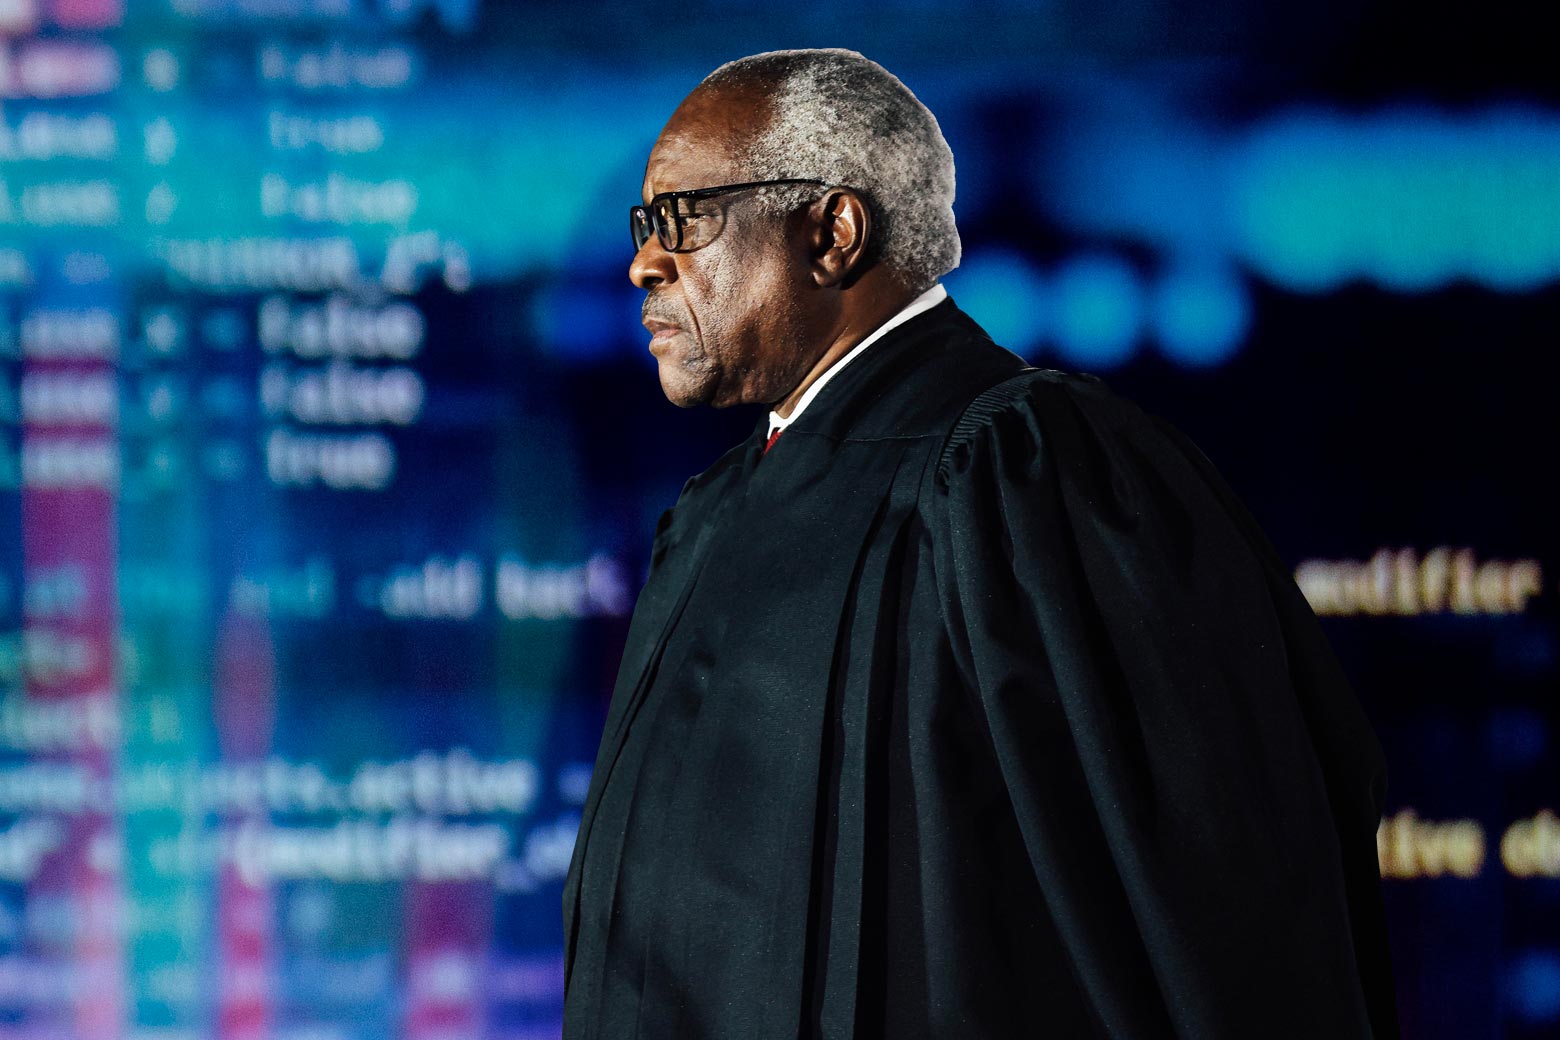 Clarence Thomas is seen against the background of a computer screen.